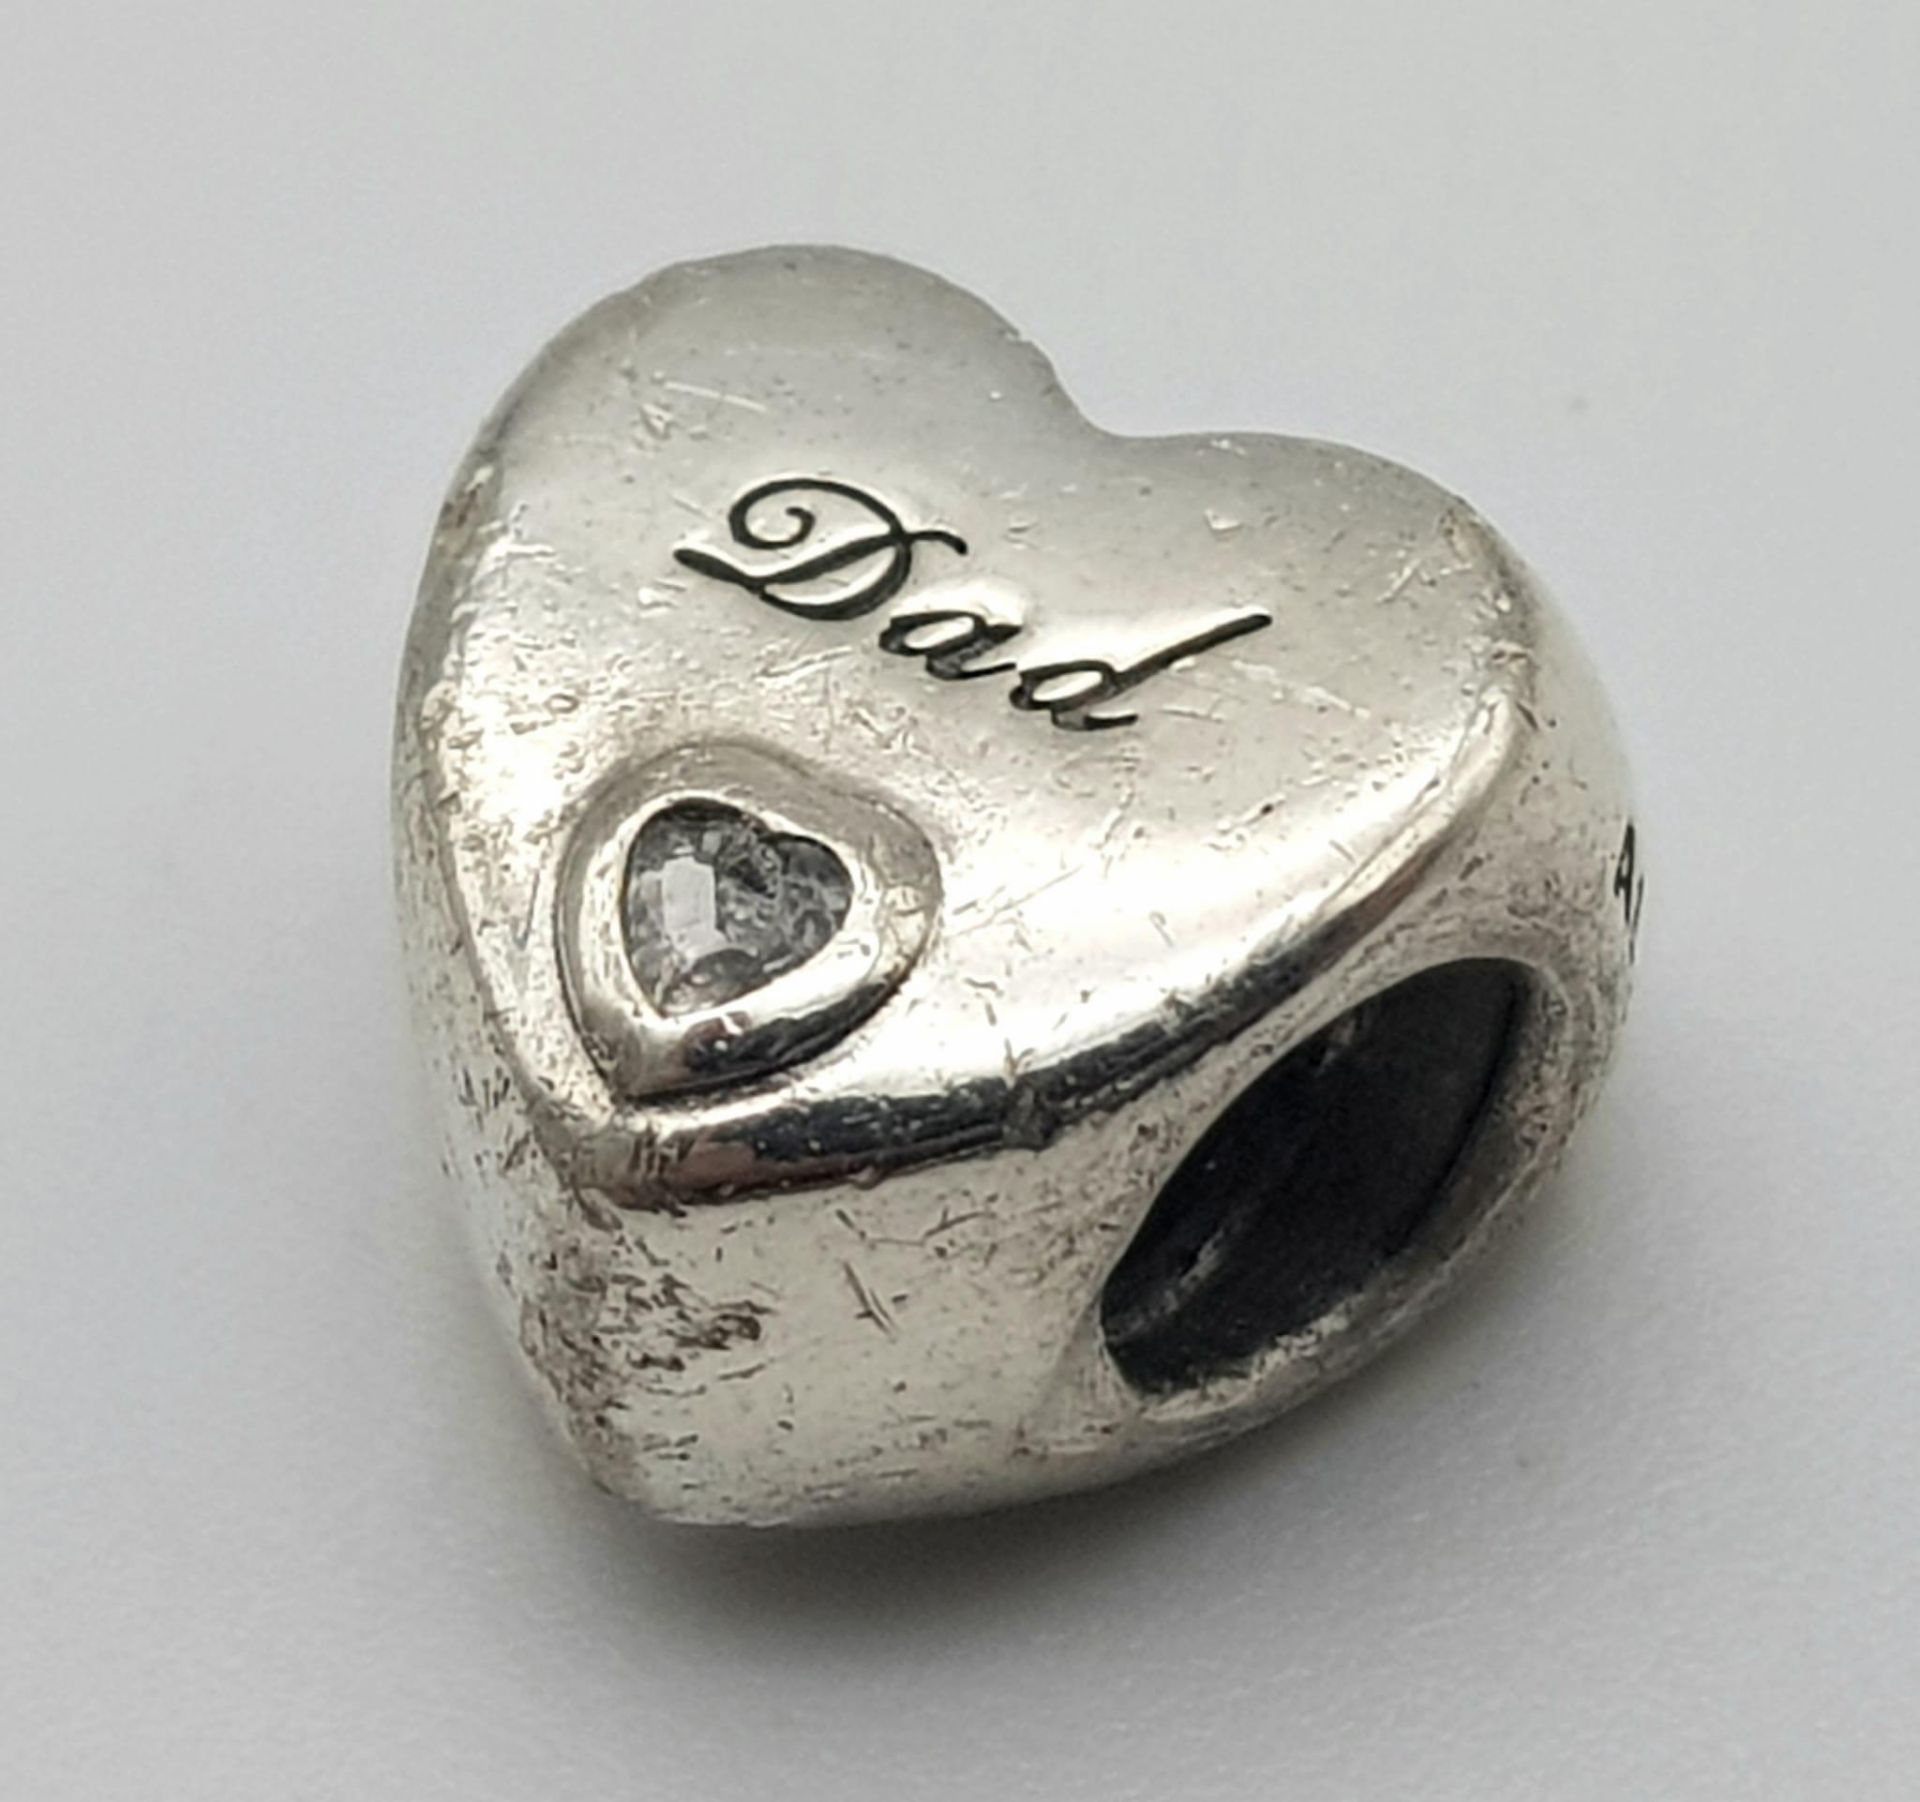 A PANDORA STERLING SILVER HEART SHAPED STONE SET CHARM, ENGRAVED WITH THE WORD "DAD" 3.9G ref: SC - Image 4 of 7